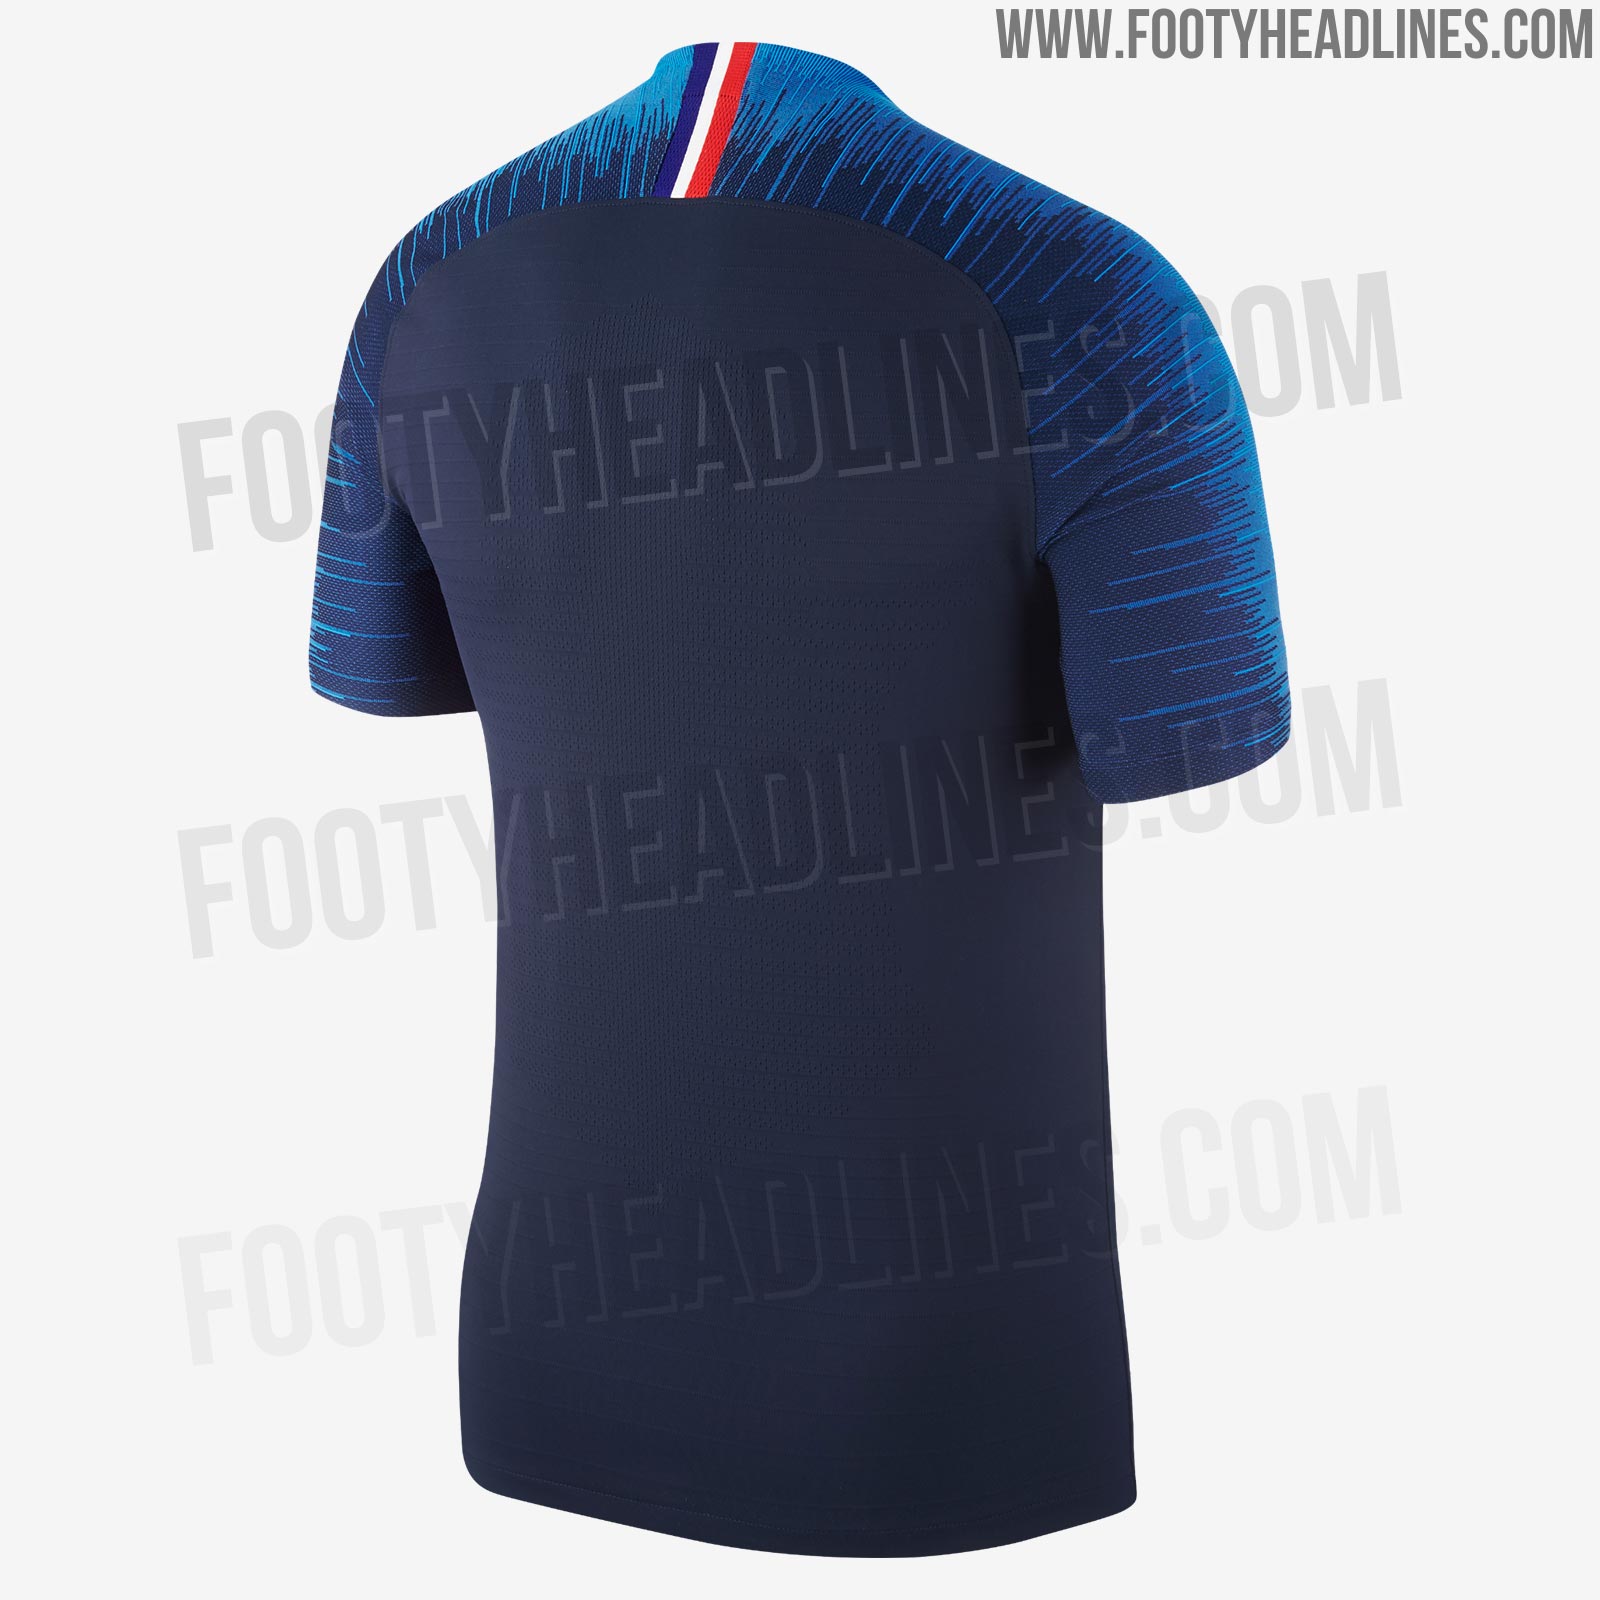 France 2018 World Cup Home Kit Revealed Footy Headlines